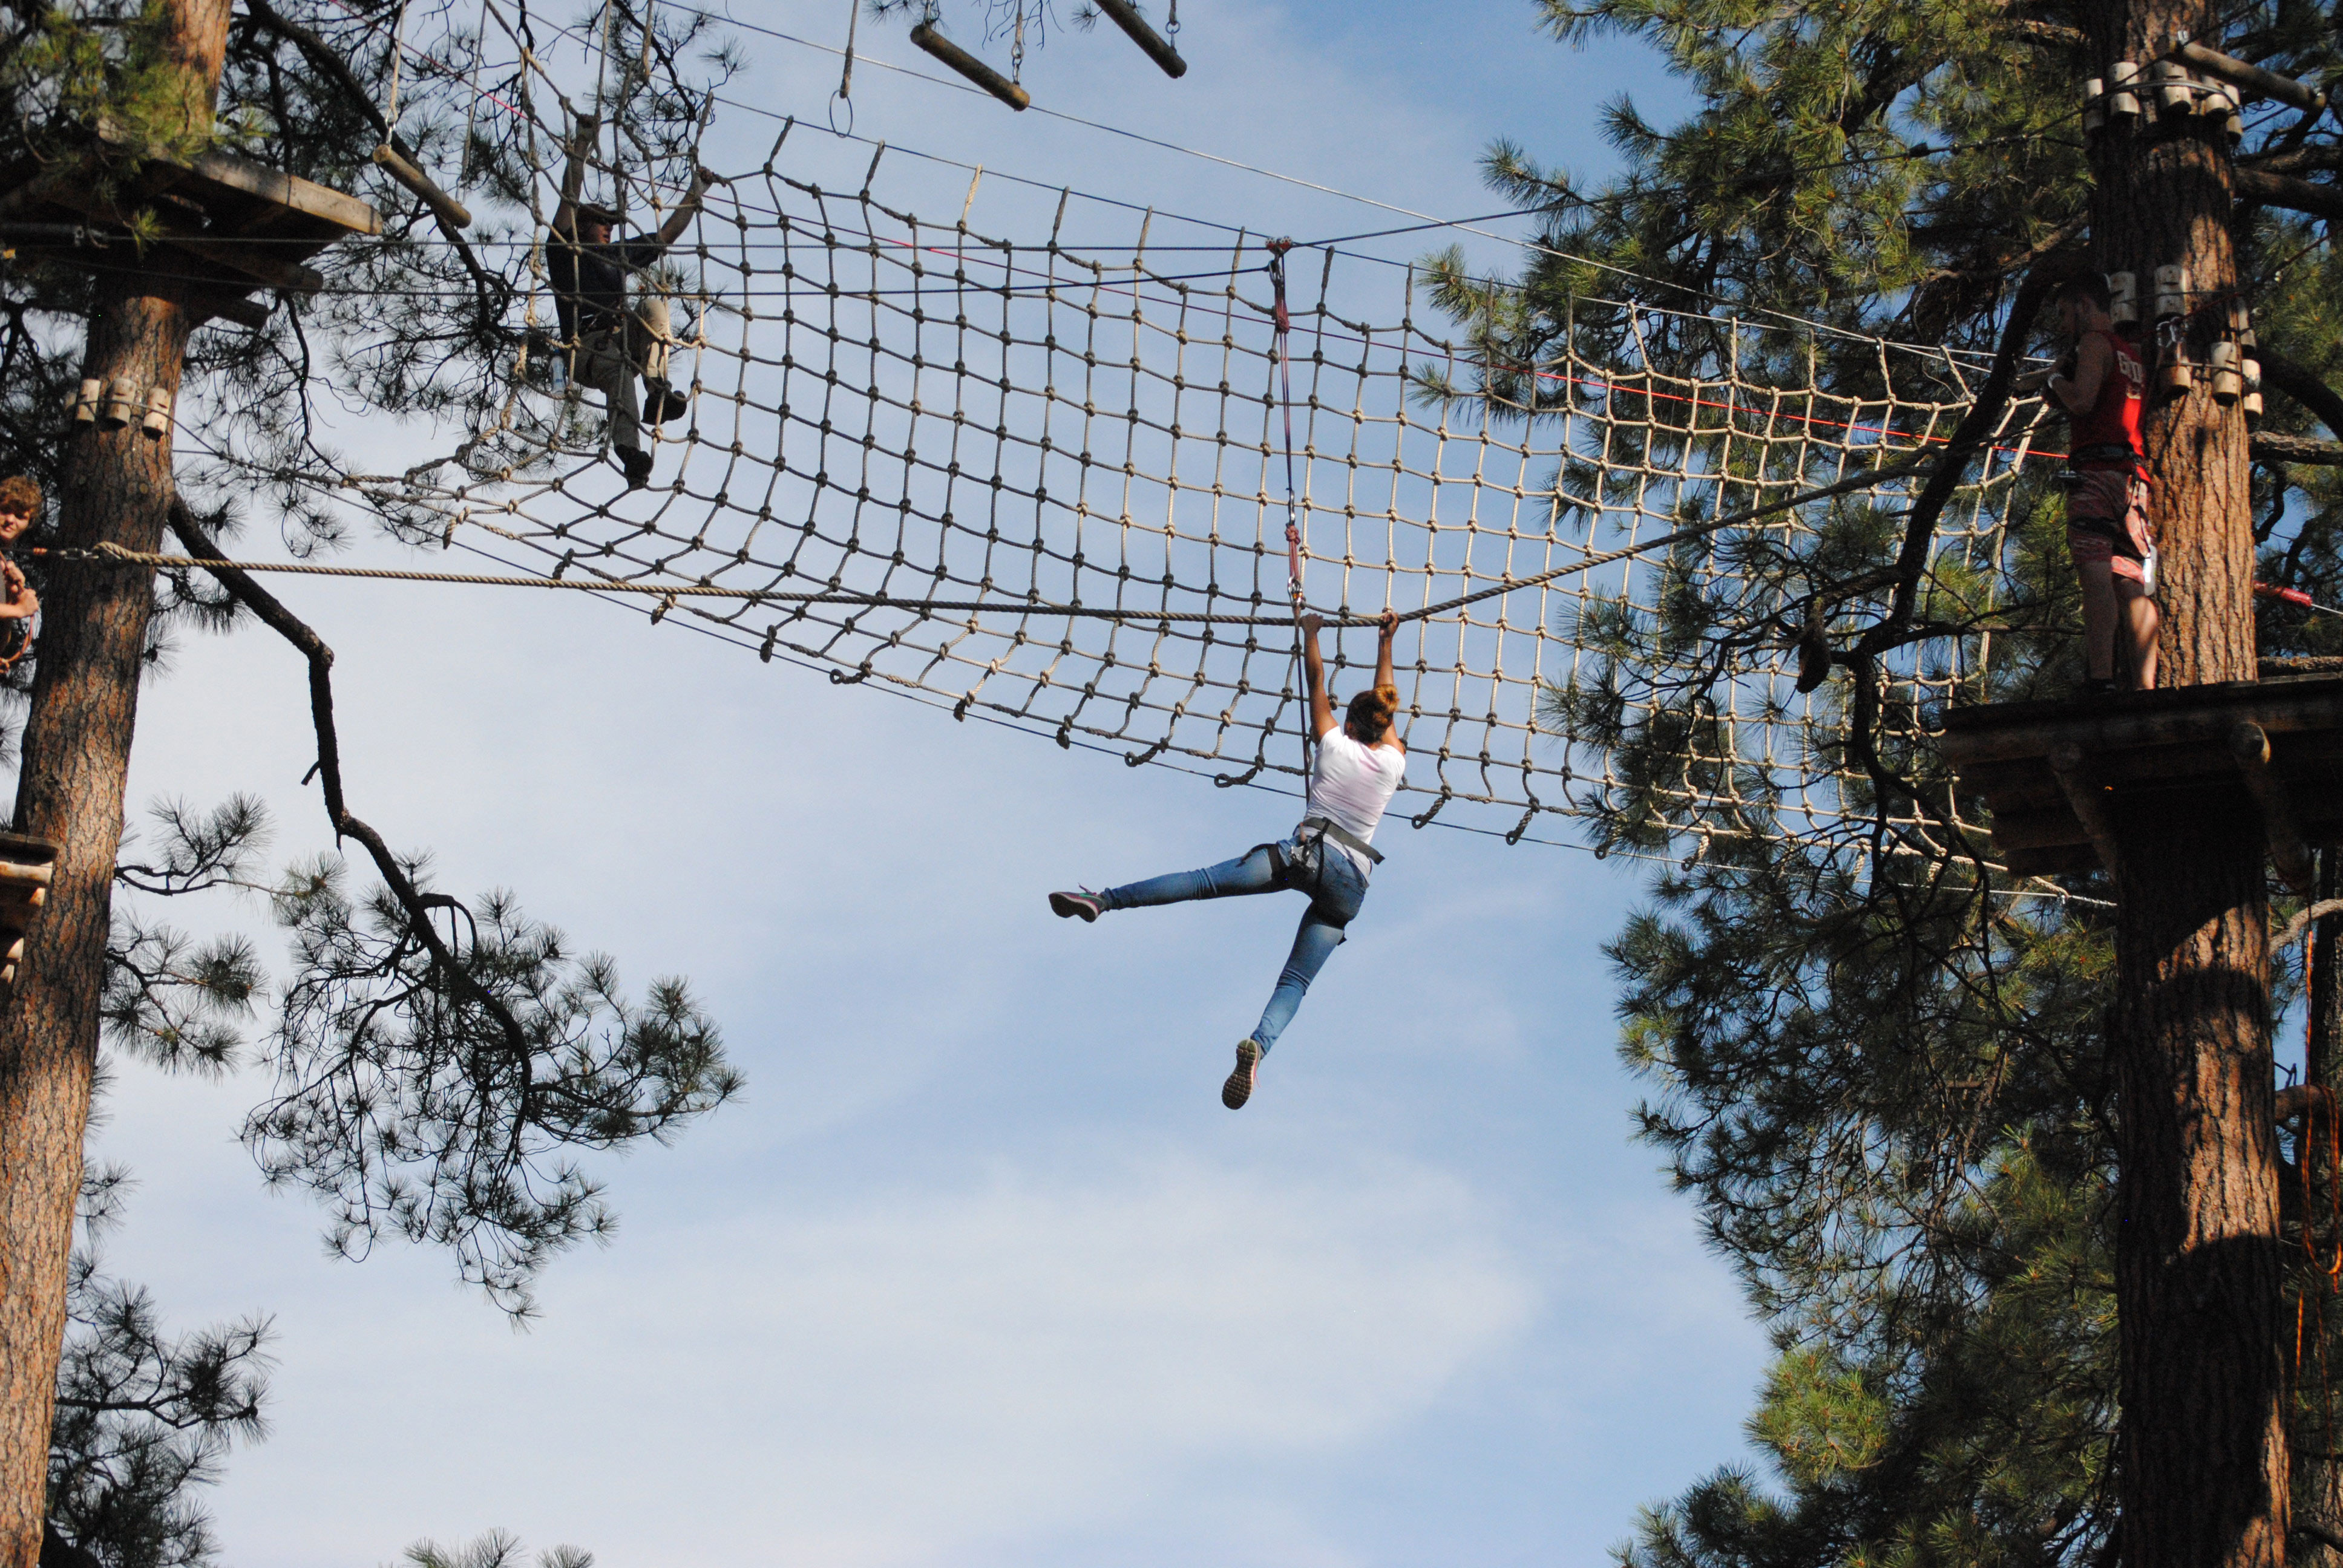 Ziplines and hanging nets are among the obstacles available at Fort Tuthill County Park. Image by Mimi Cummins / CC BY 2.0